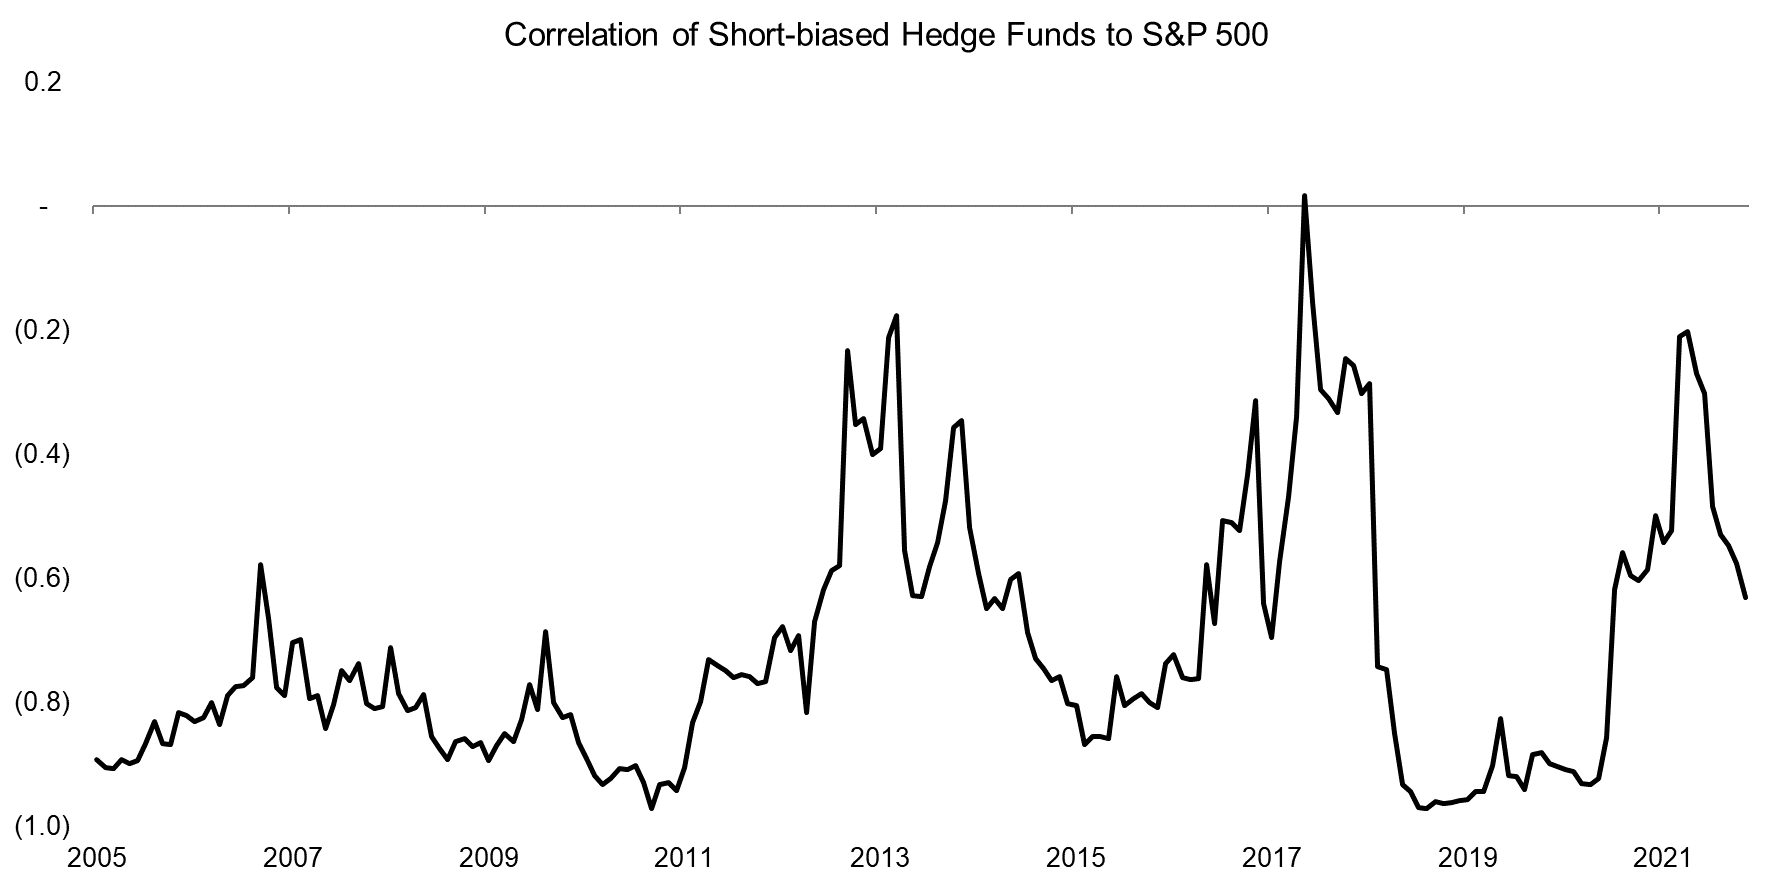 https://wps.factorresearch.com/wp-content/uploads/2022/09/Correlation-of-Short-biased-Hedge-Funds-to-SP-500.png